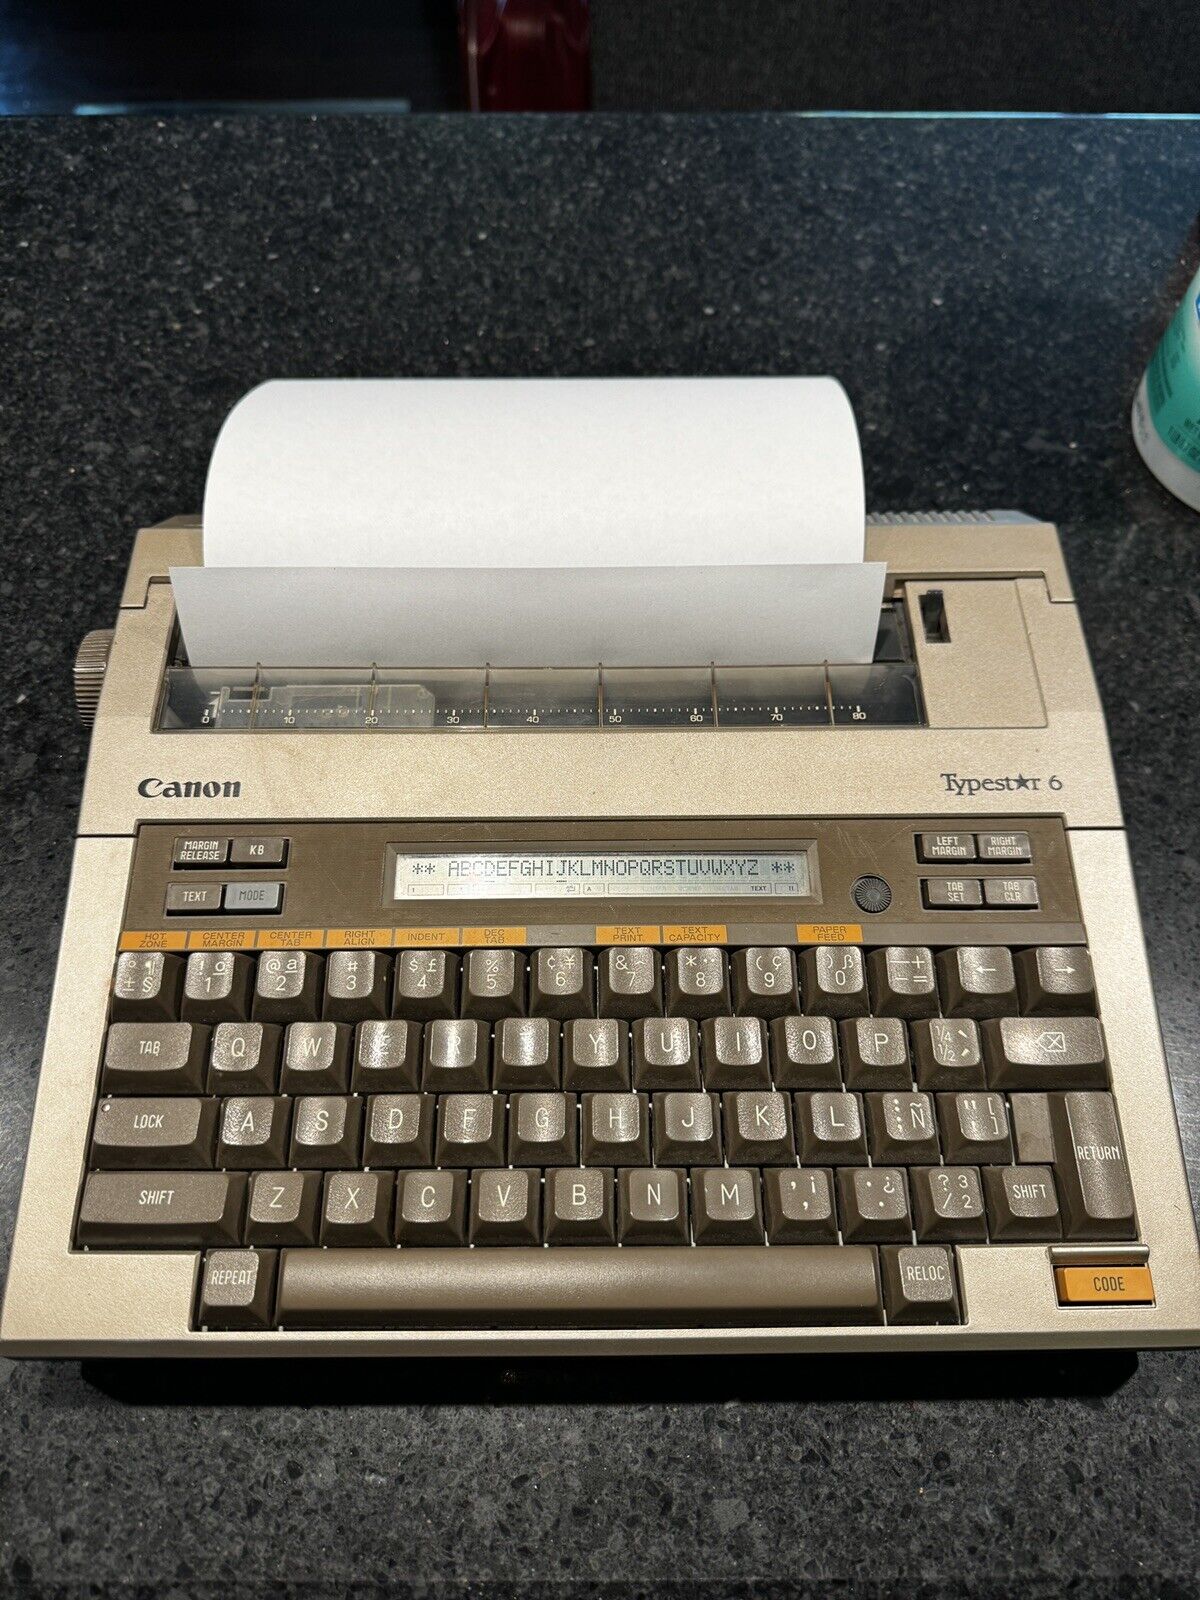 1984 Canon Typestar 6 Electric Typewriter. Test Led But Some Issues, See Descrip